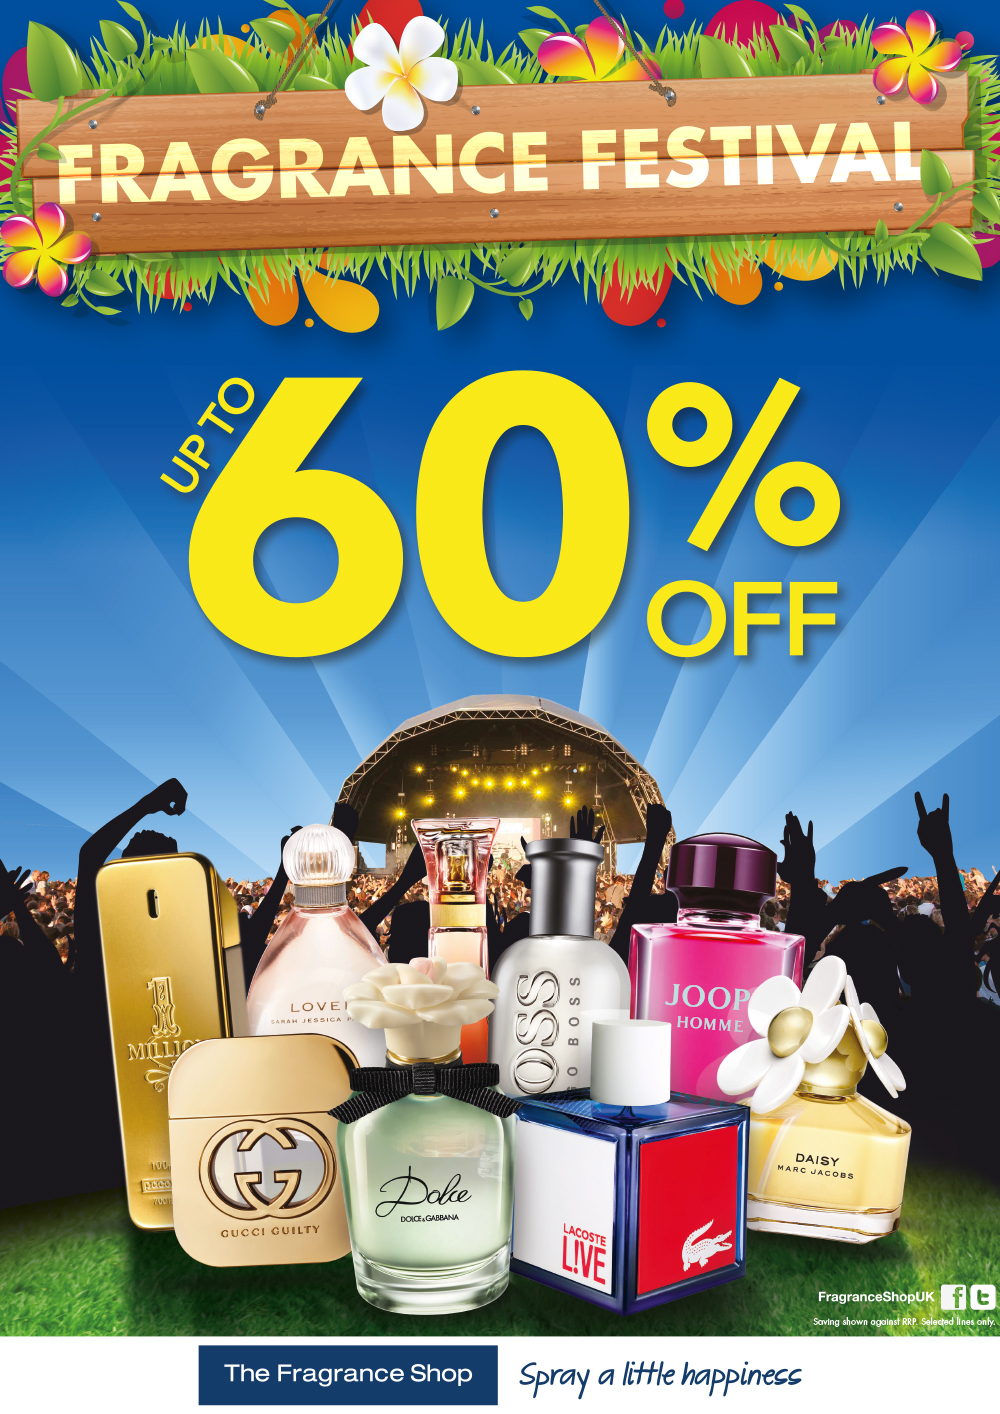 Fragrance Festival at The Fragrance Shop, West Bromwich